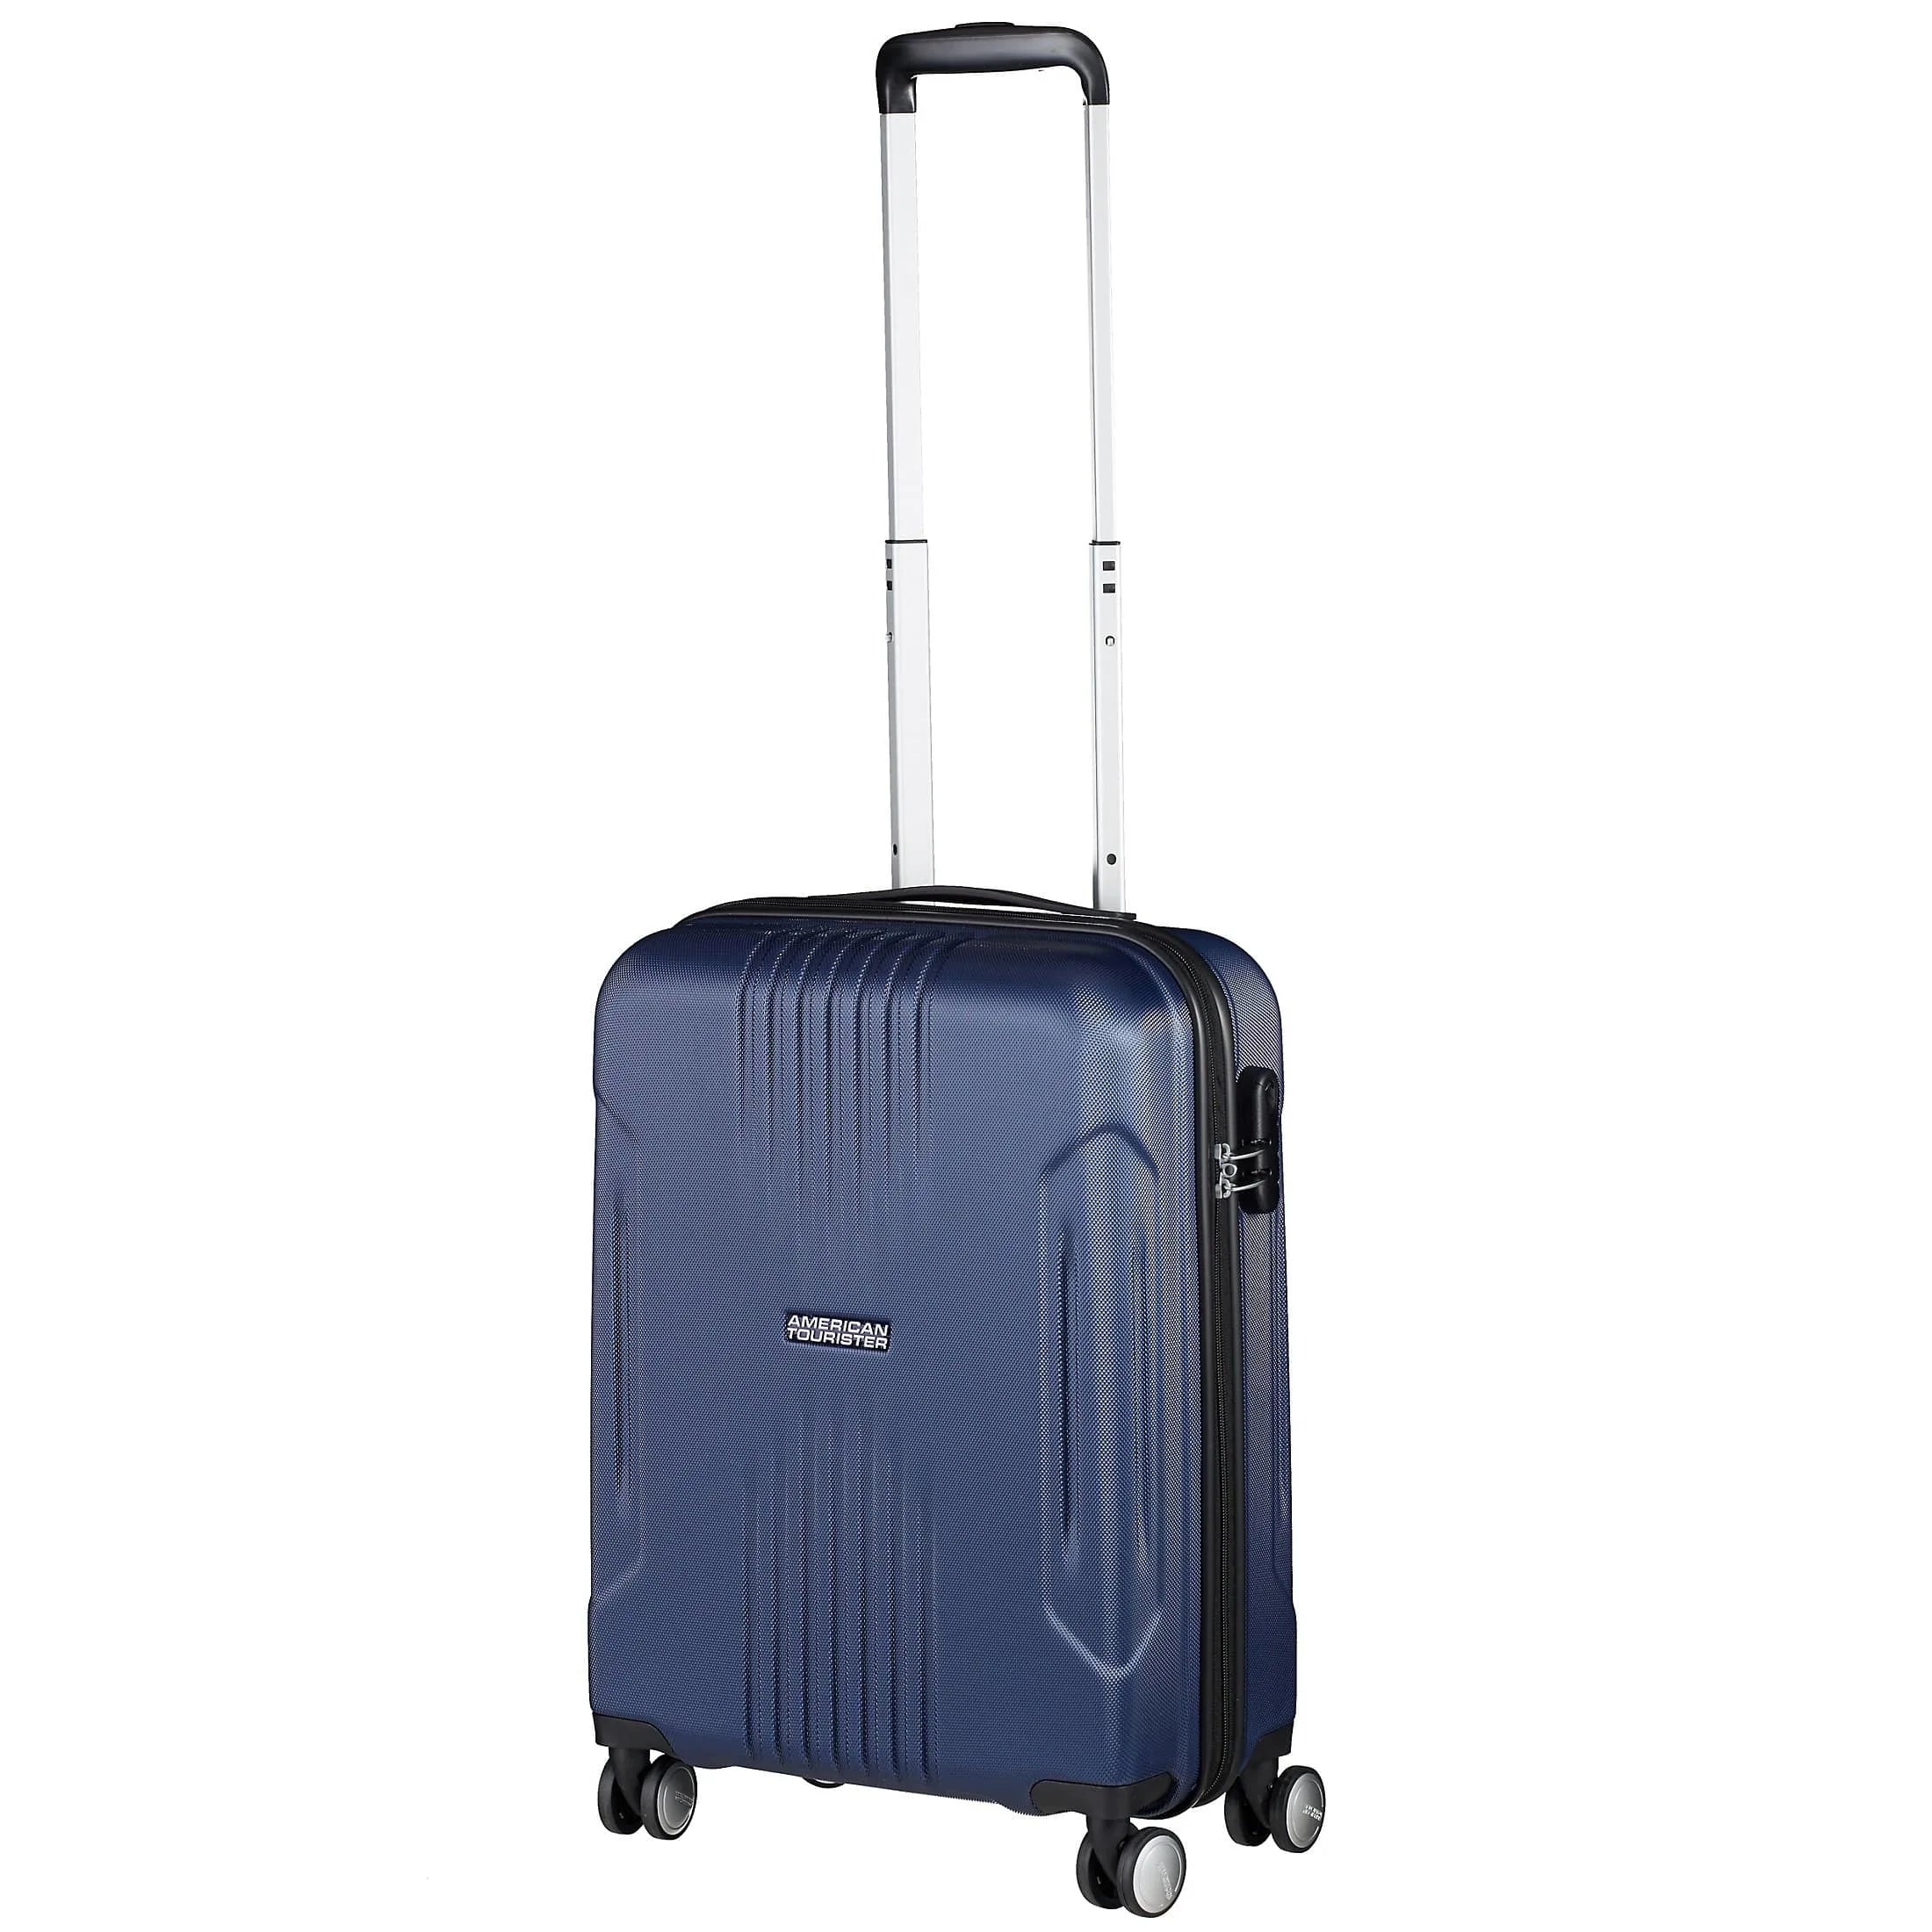 American Tourister Tracklite trolley cabine 4 roues 55 cm - marine foncé